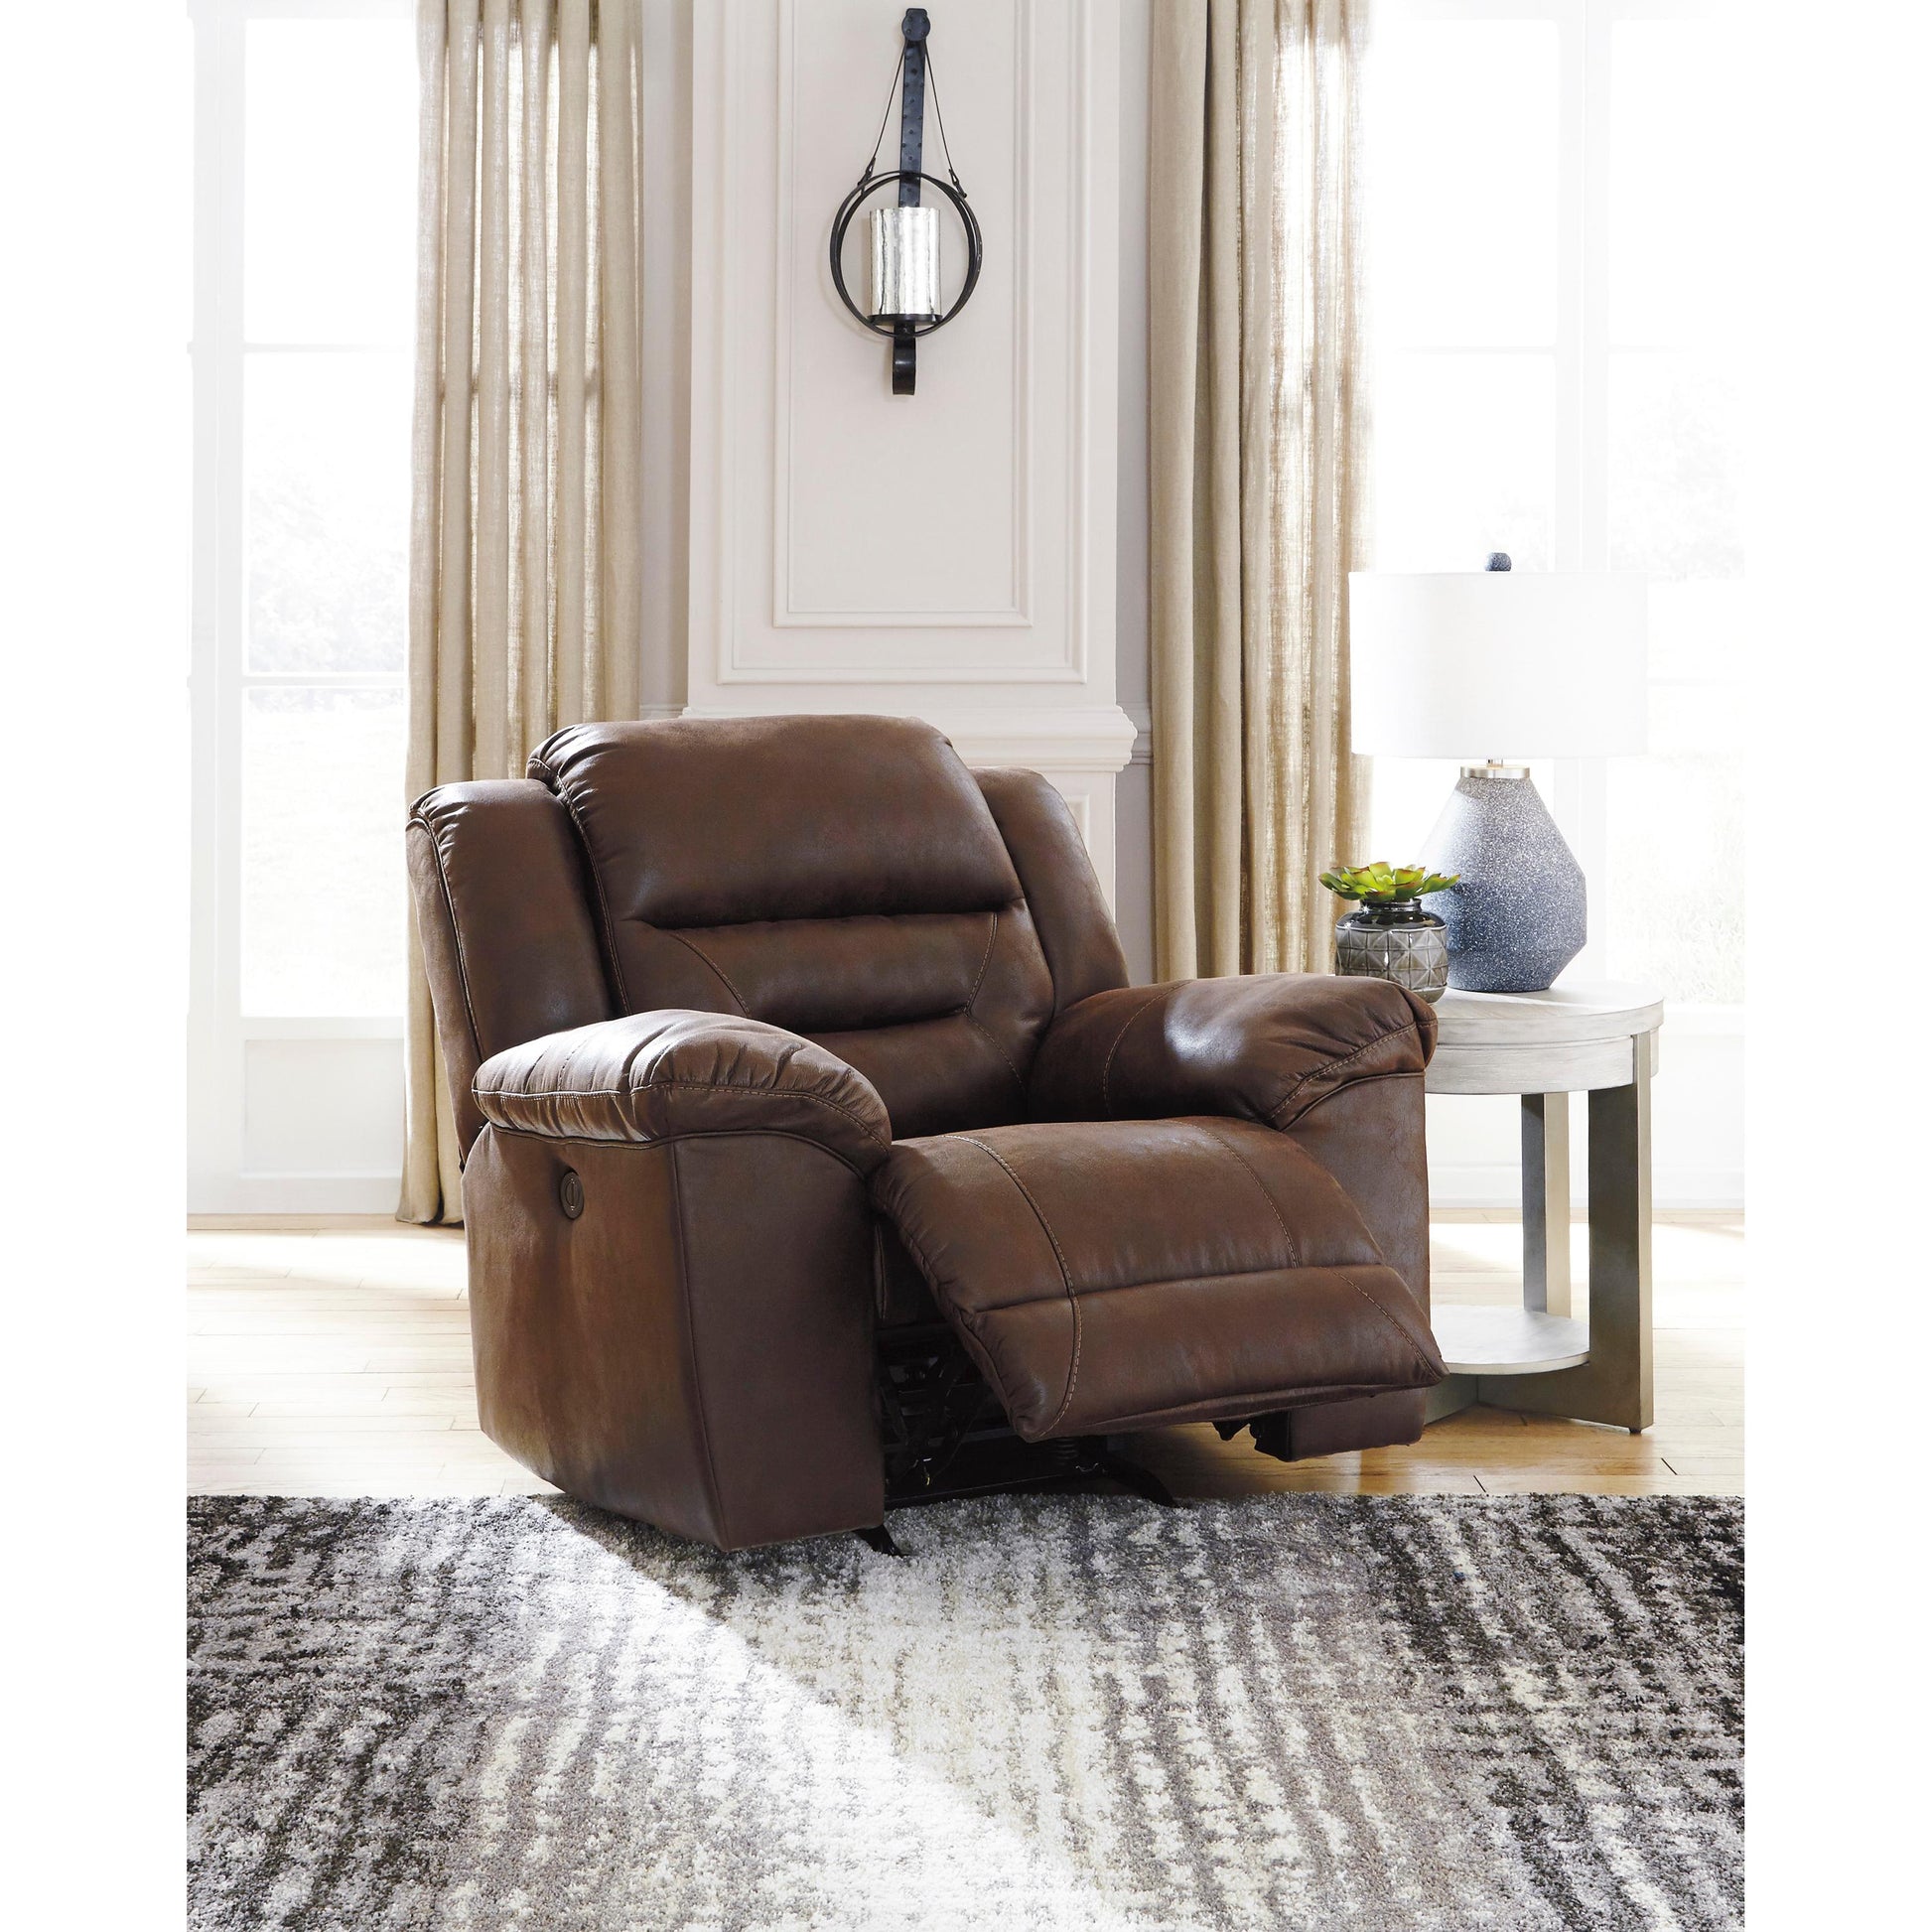 Signature Design by Ashley Stoneland Power Rocker Leather Look Recliner 3990498 IMAGE 6